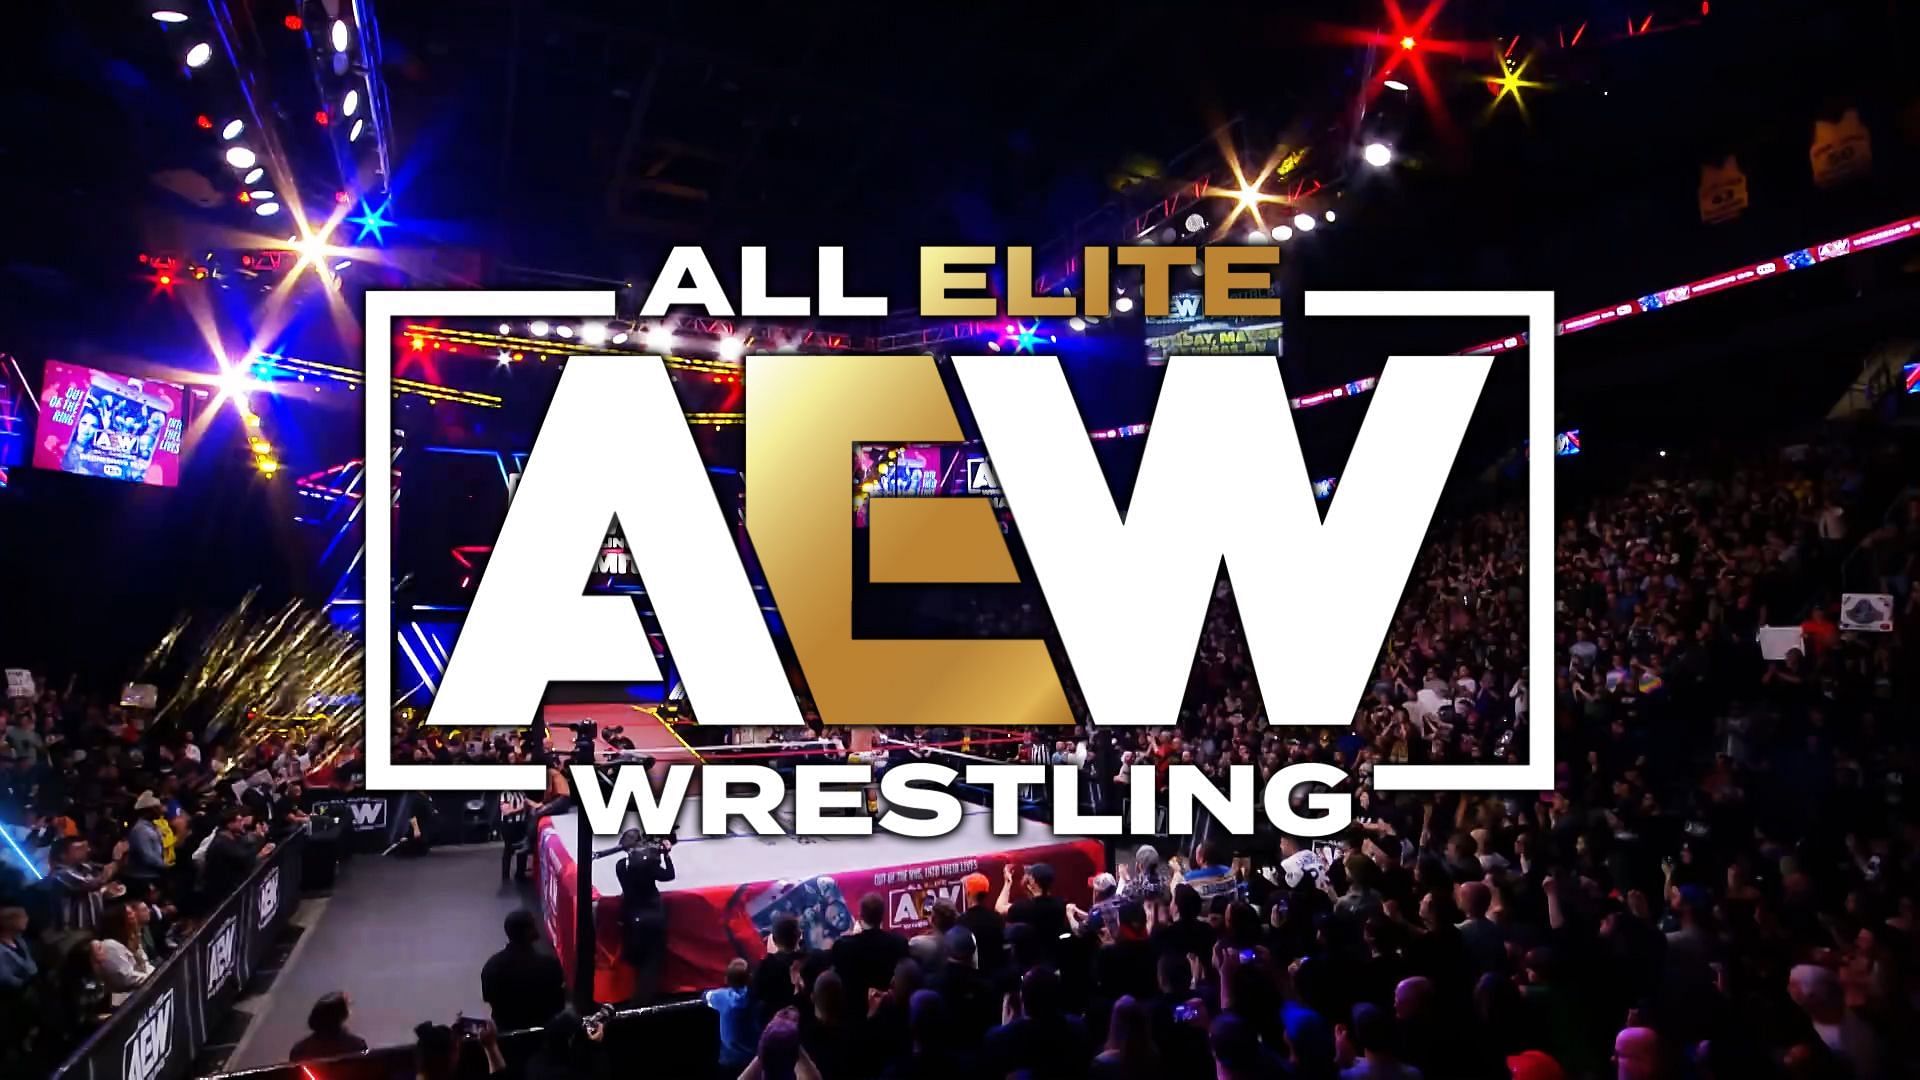 AEW has signed several former WWE Superstars